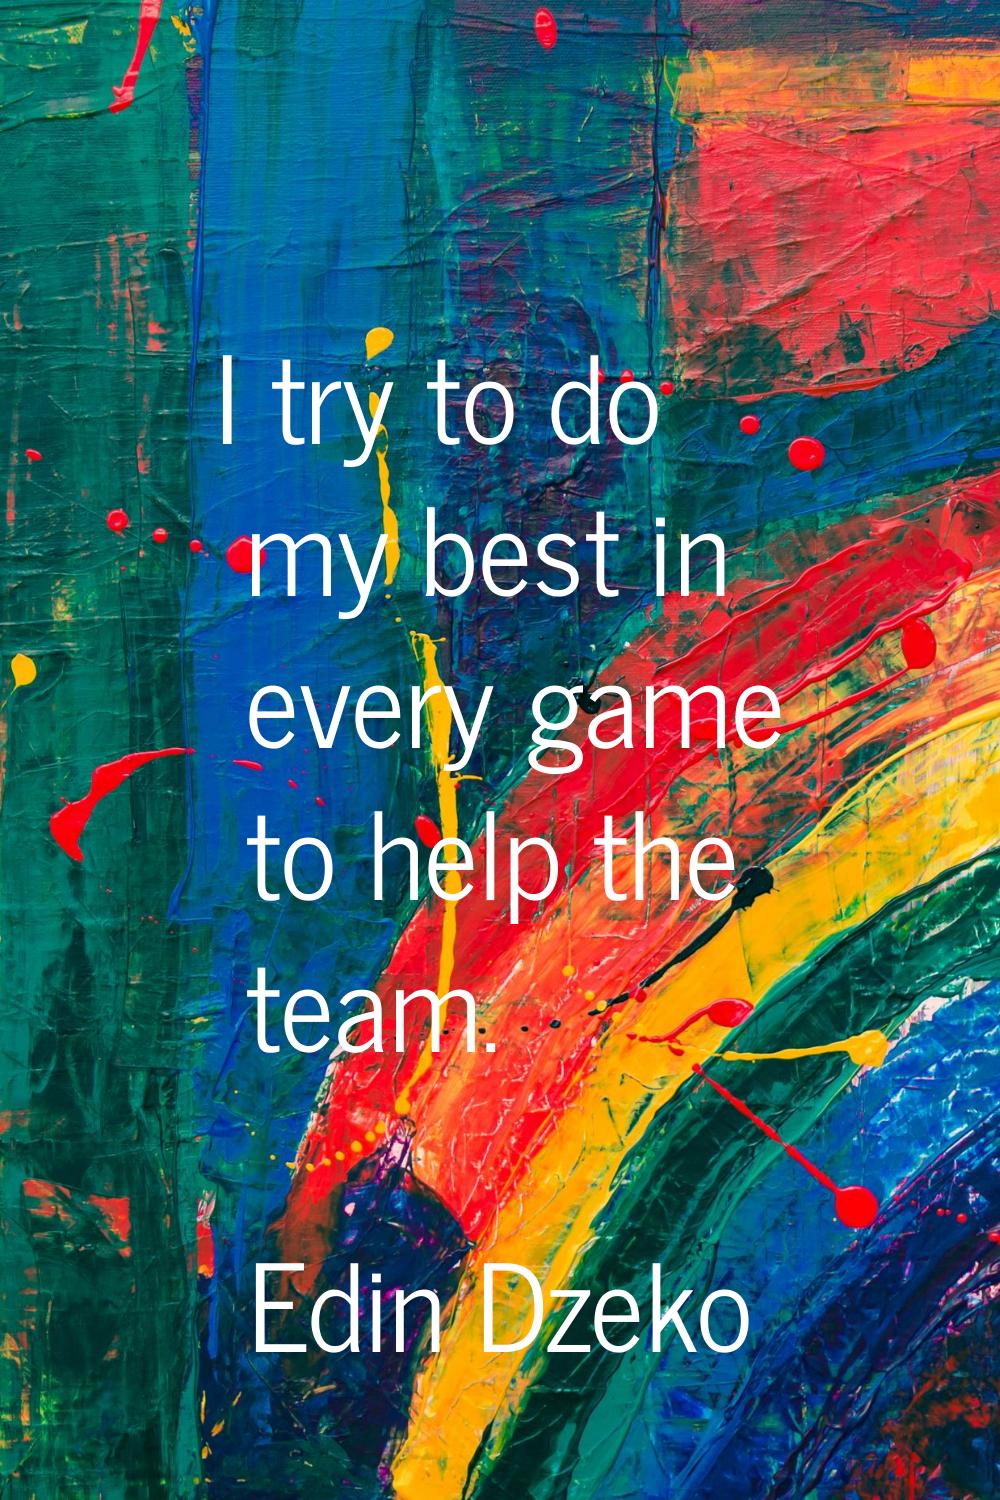 I try to do my best in every game to help the team.